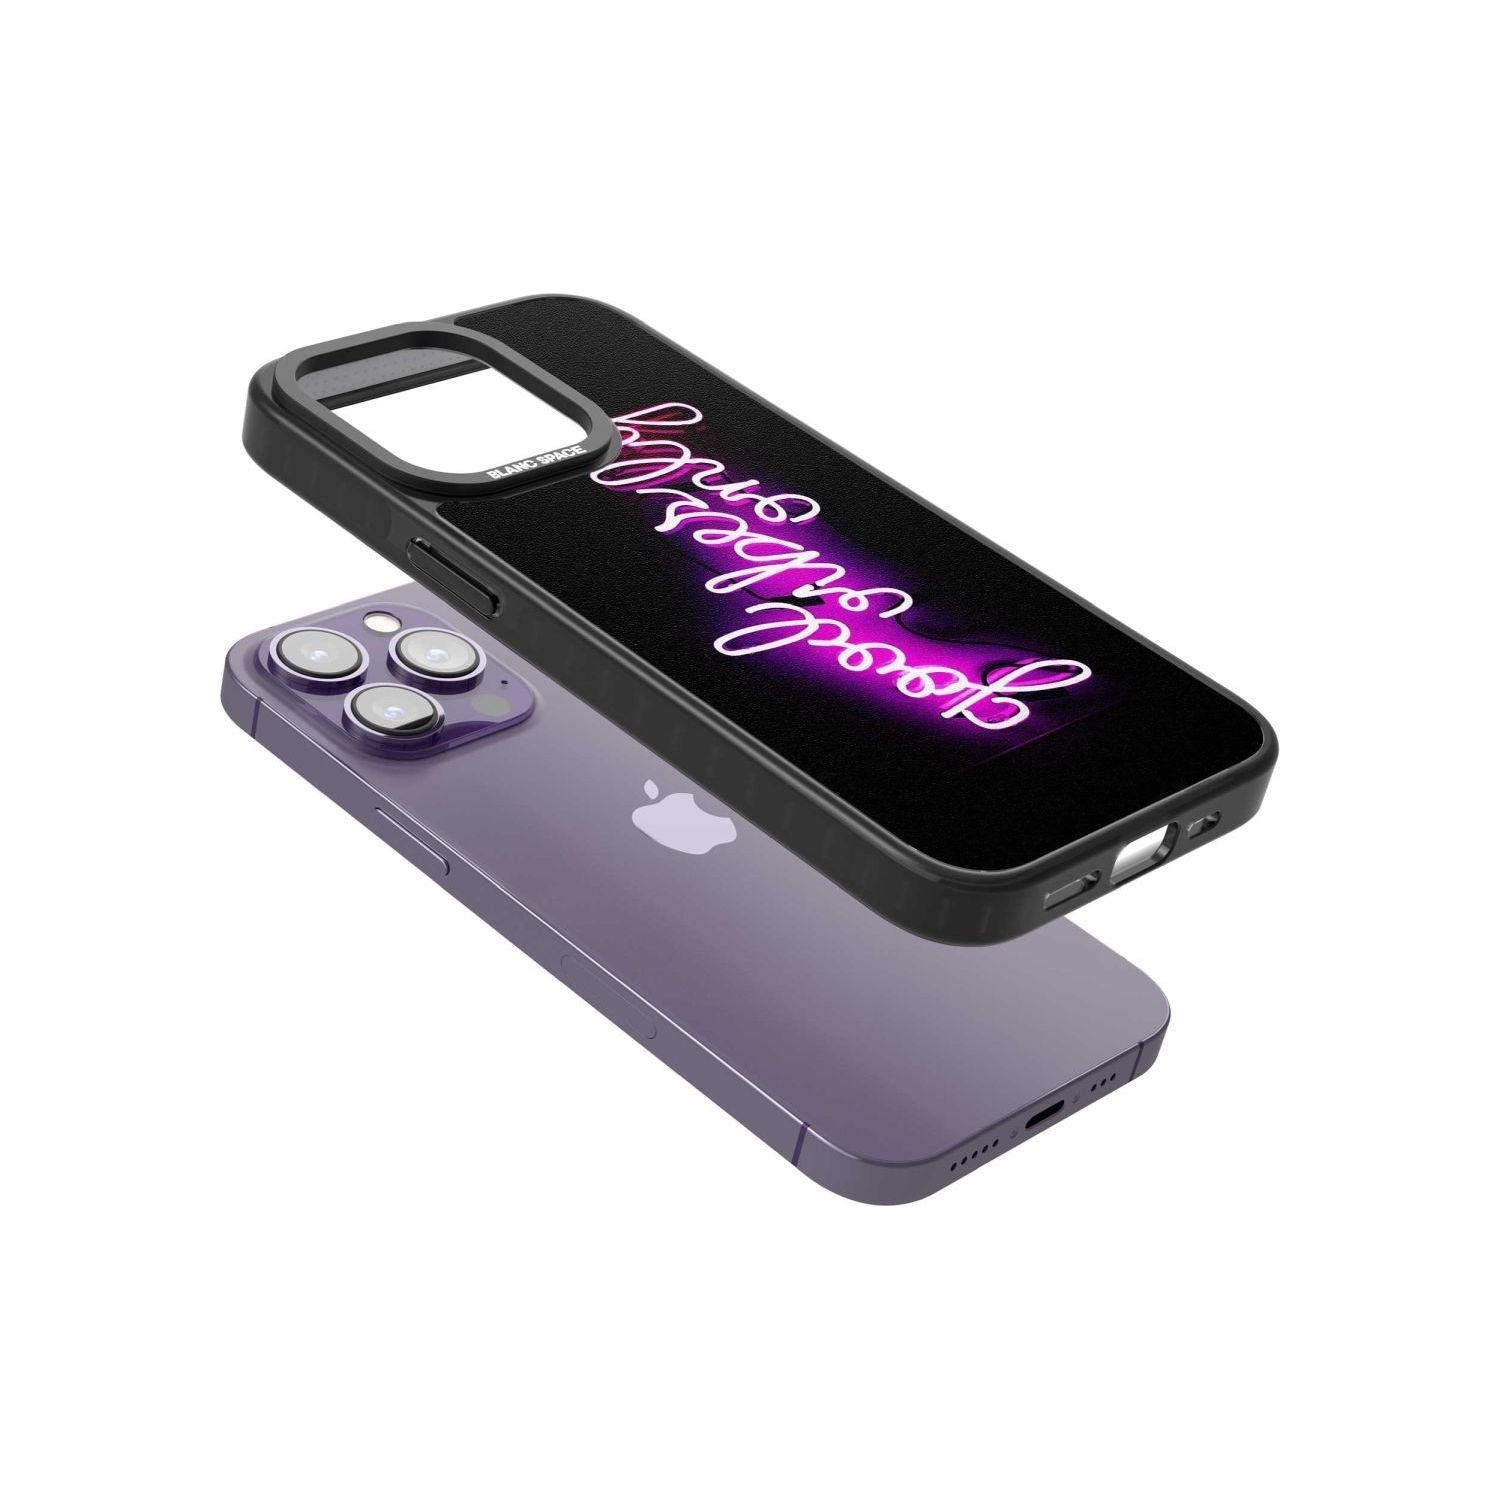 Good Vibes Only Pink Neon Phone Case iPhone 15 Pro Max / Black Impact Case,iPhone 15 Plus / Black Impact Case,iPhone 15 Pro / Black Impact Case,iPhone 15 / Black Impact Case,iPhone 15 Pro Max / Impact Case,iPhone 15 Plus / Impact Case,iPhone 15 Pro / Impact Case,iPhone 15 / Impact Case,iPhone 15 Pro Max / Magsafe Black Impact Case,iPhone 15 Plus / Magsafe Black Impact Case,iPhone 15 Pro / Magsafe Black Impact Case,iPhone 15 / Magsafe Black Impact Case,iPhone 14 Pro Max / Black Impact Case,iPhone 14 Plus / B